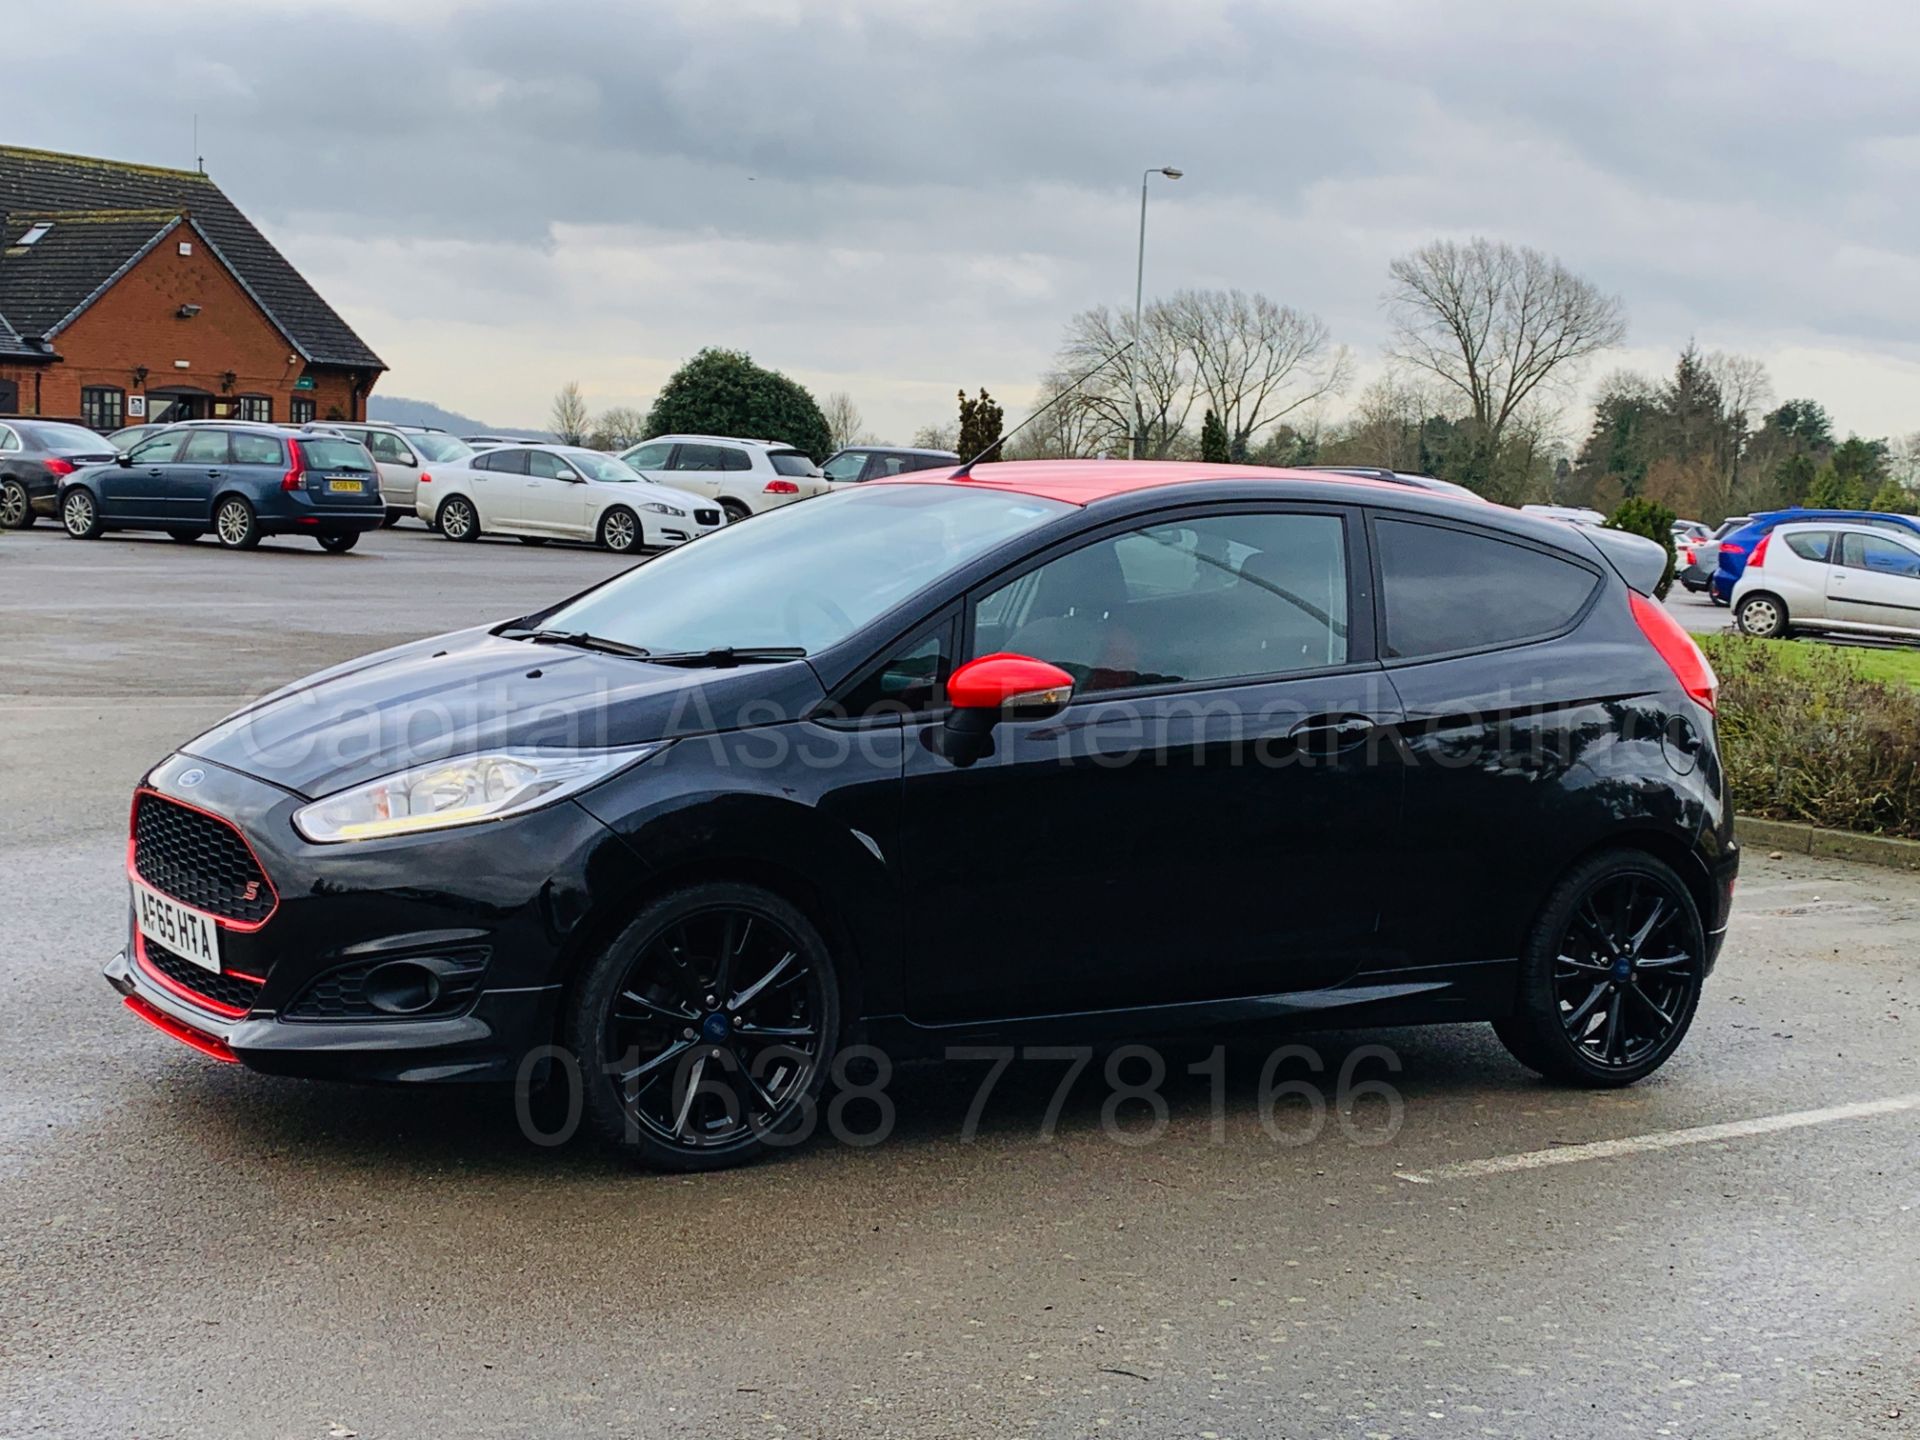 (On Sale) FORD FIESTA *ZETEC S - BLACK EDITION* (2016 MODEL) '1.0L ECO-BOOST - 140 BHP' - Image 6 of 45